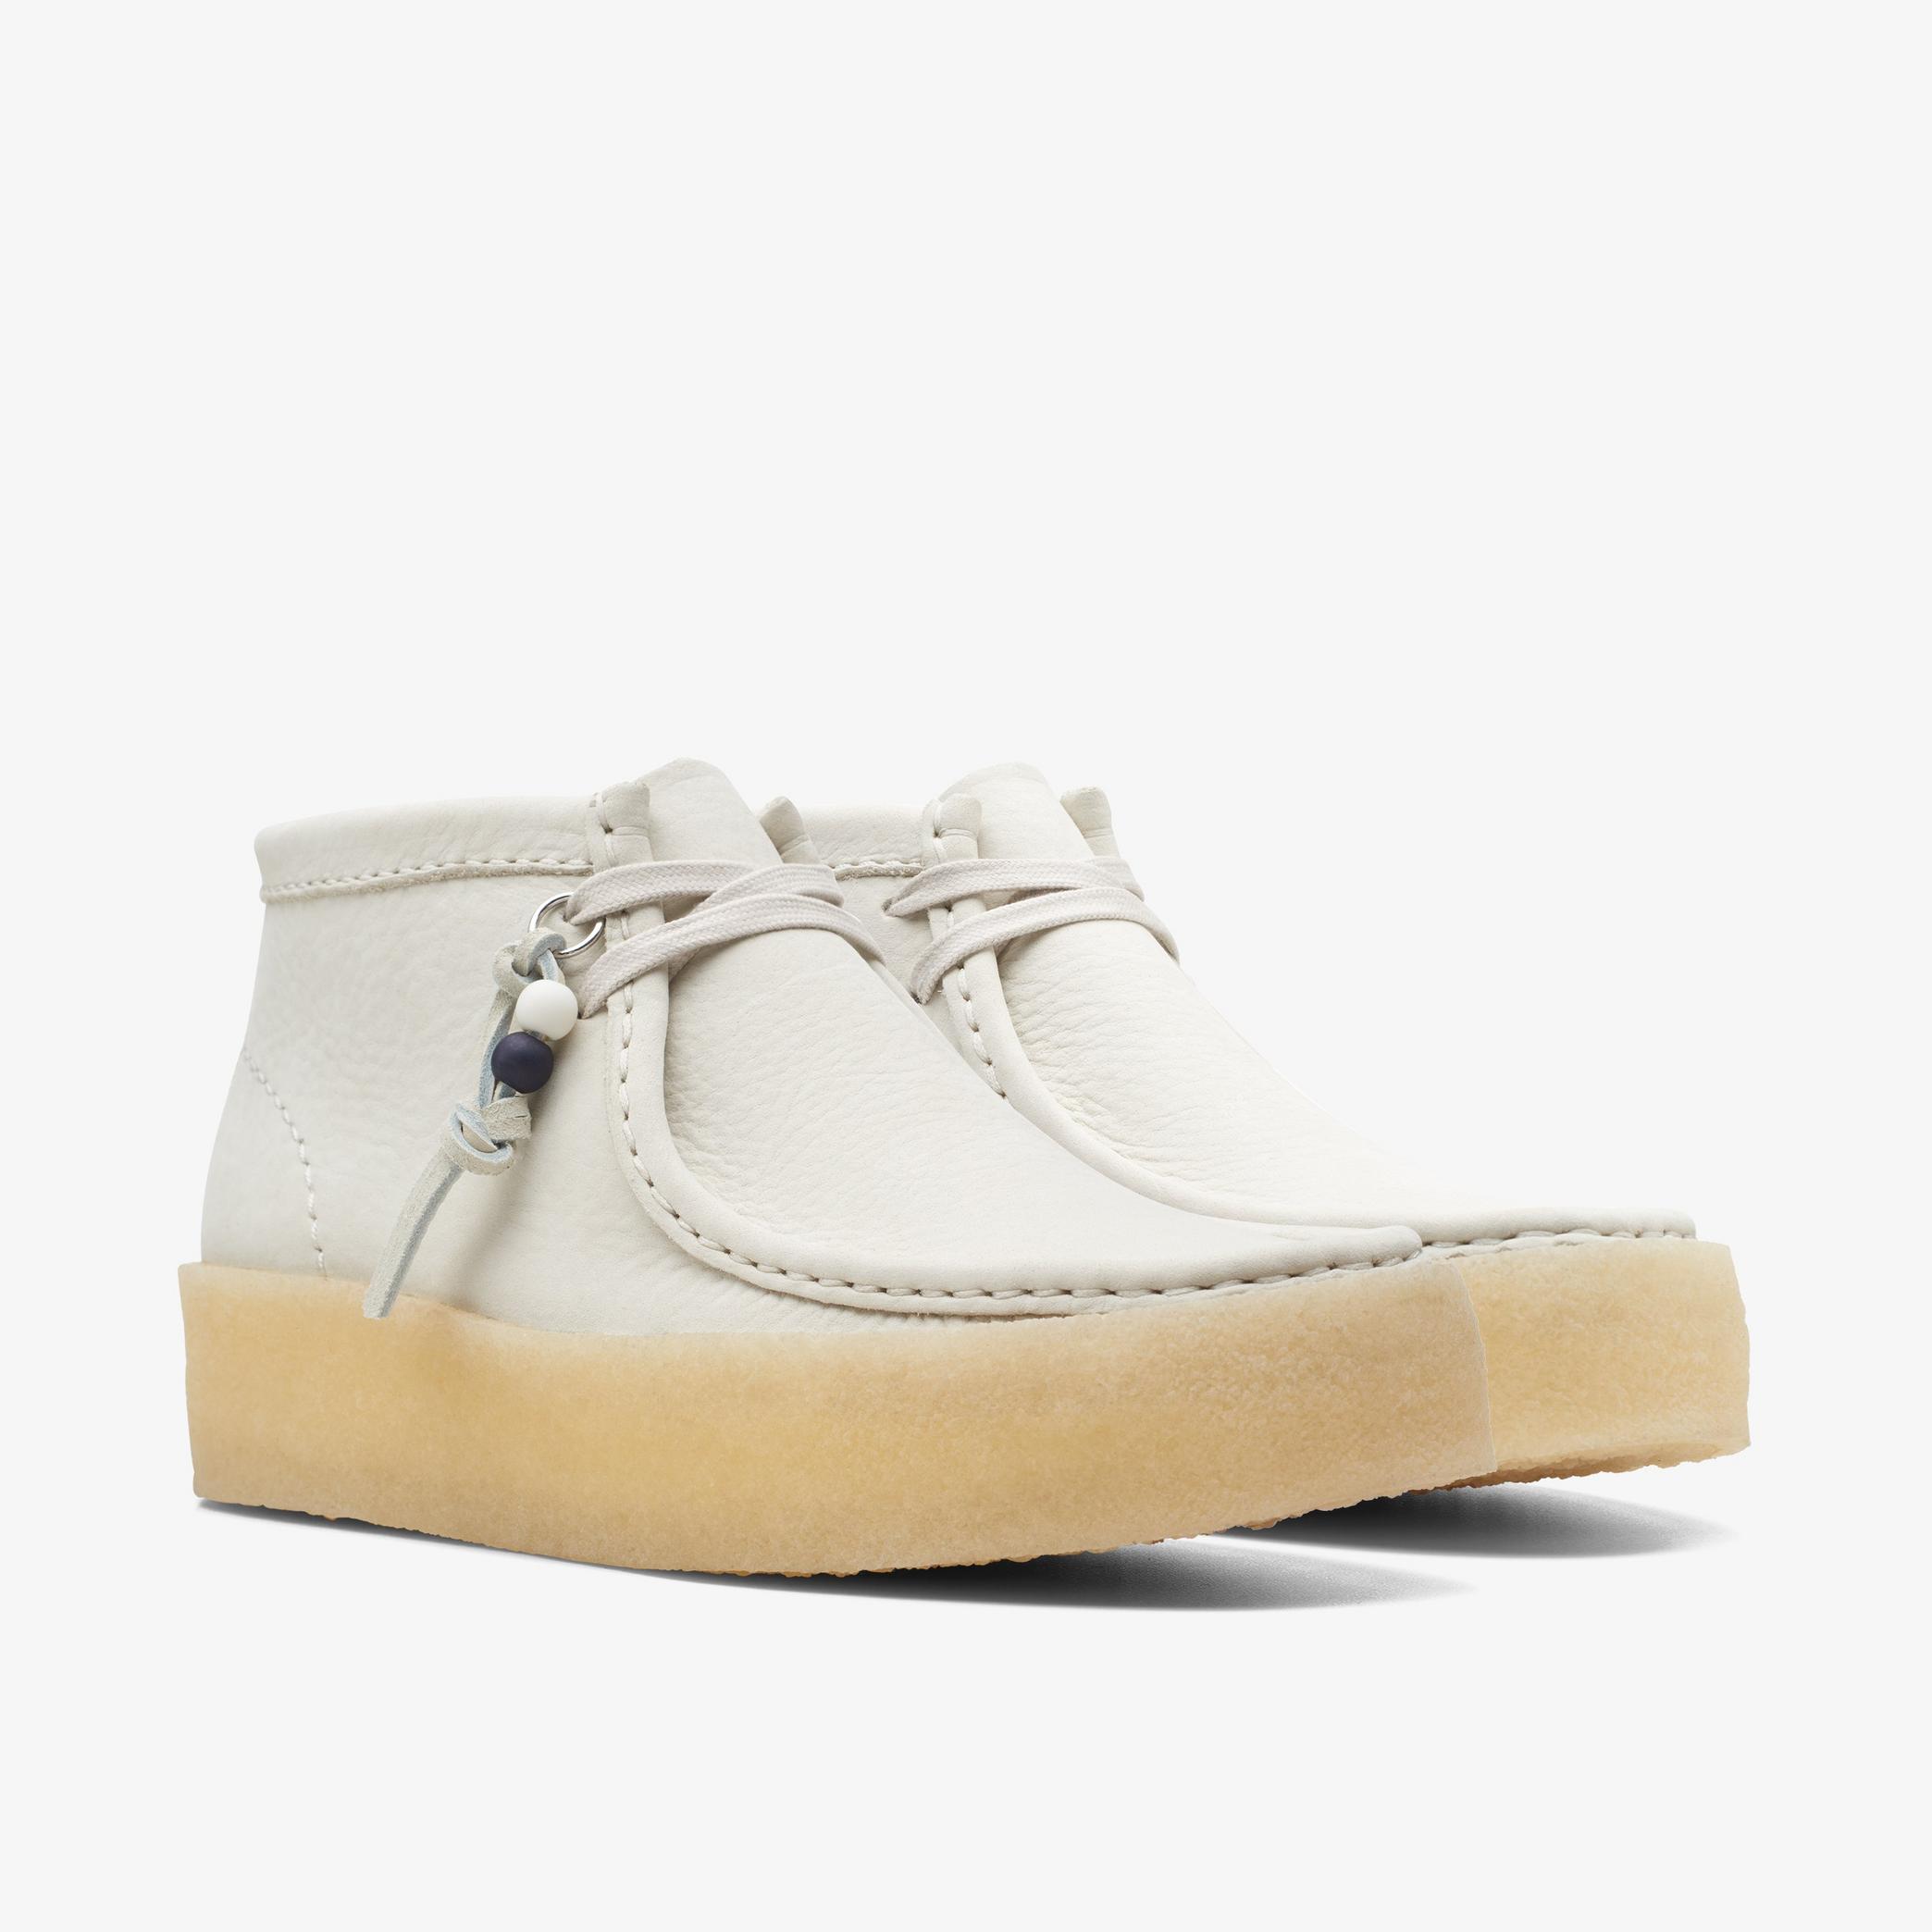 Wallabee Cup Boot White Nubuck Boots, view 4 of 6